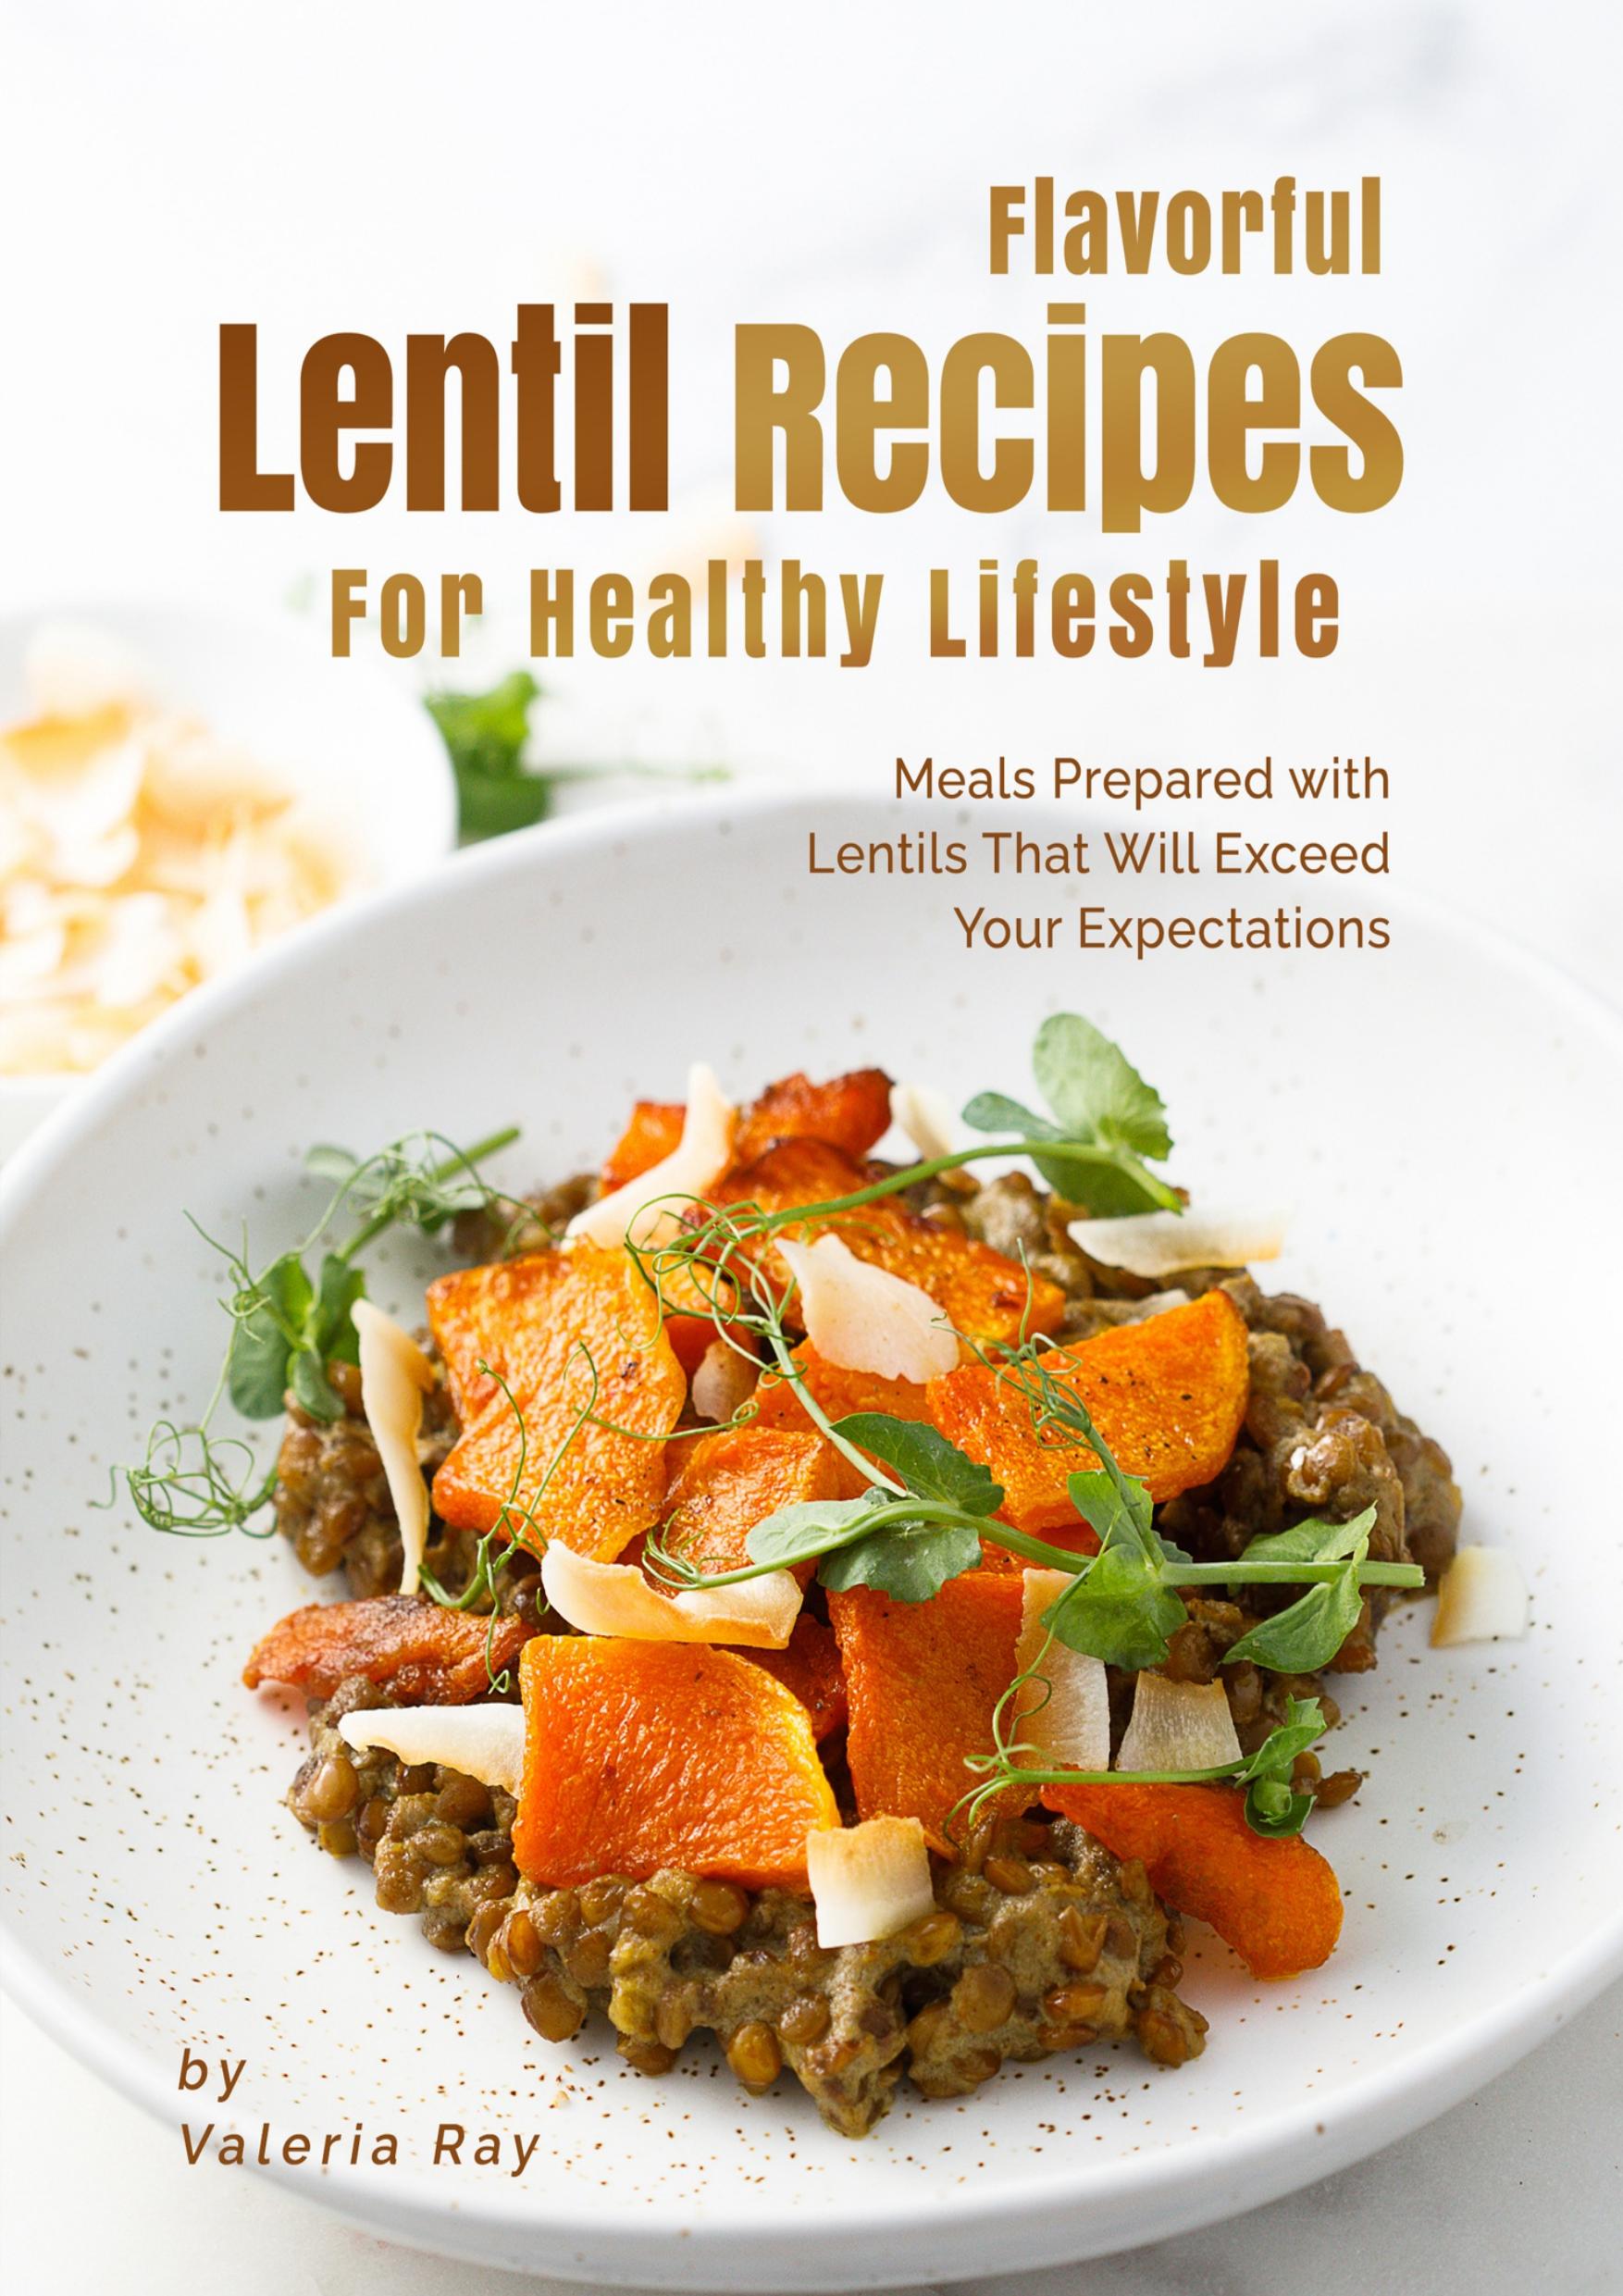 Flavorful Lentil Recipes For Healthy Lifestyle: Meals Prepared with Lentils That Will Exceed Your Expectations by Ray Valeria